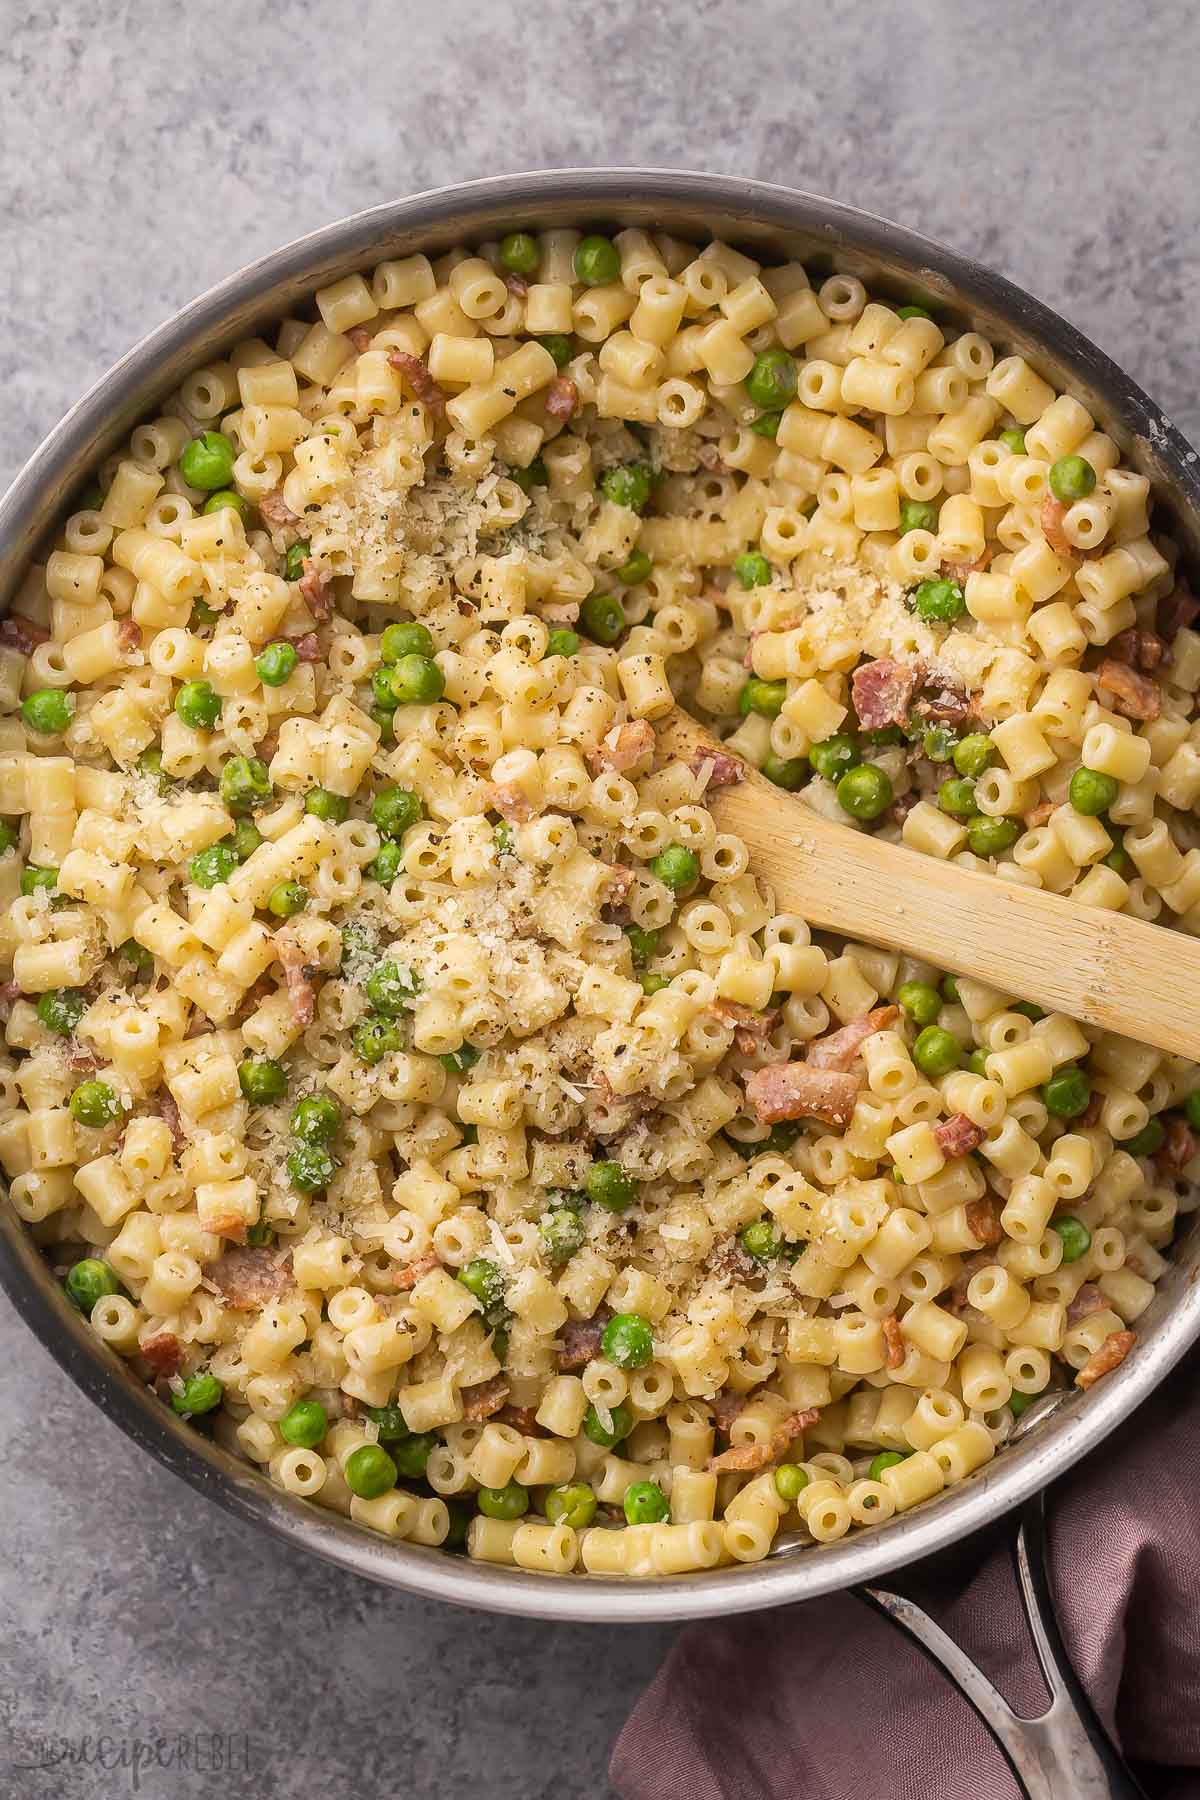 large steel pan filled with ditalini pasta, bacon, peas and a wooden ladle.